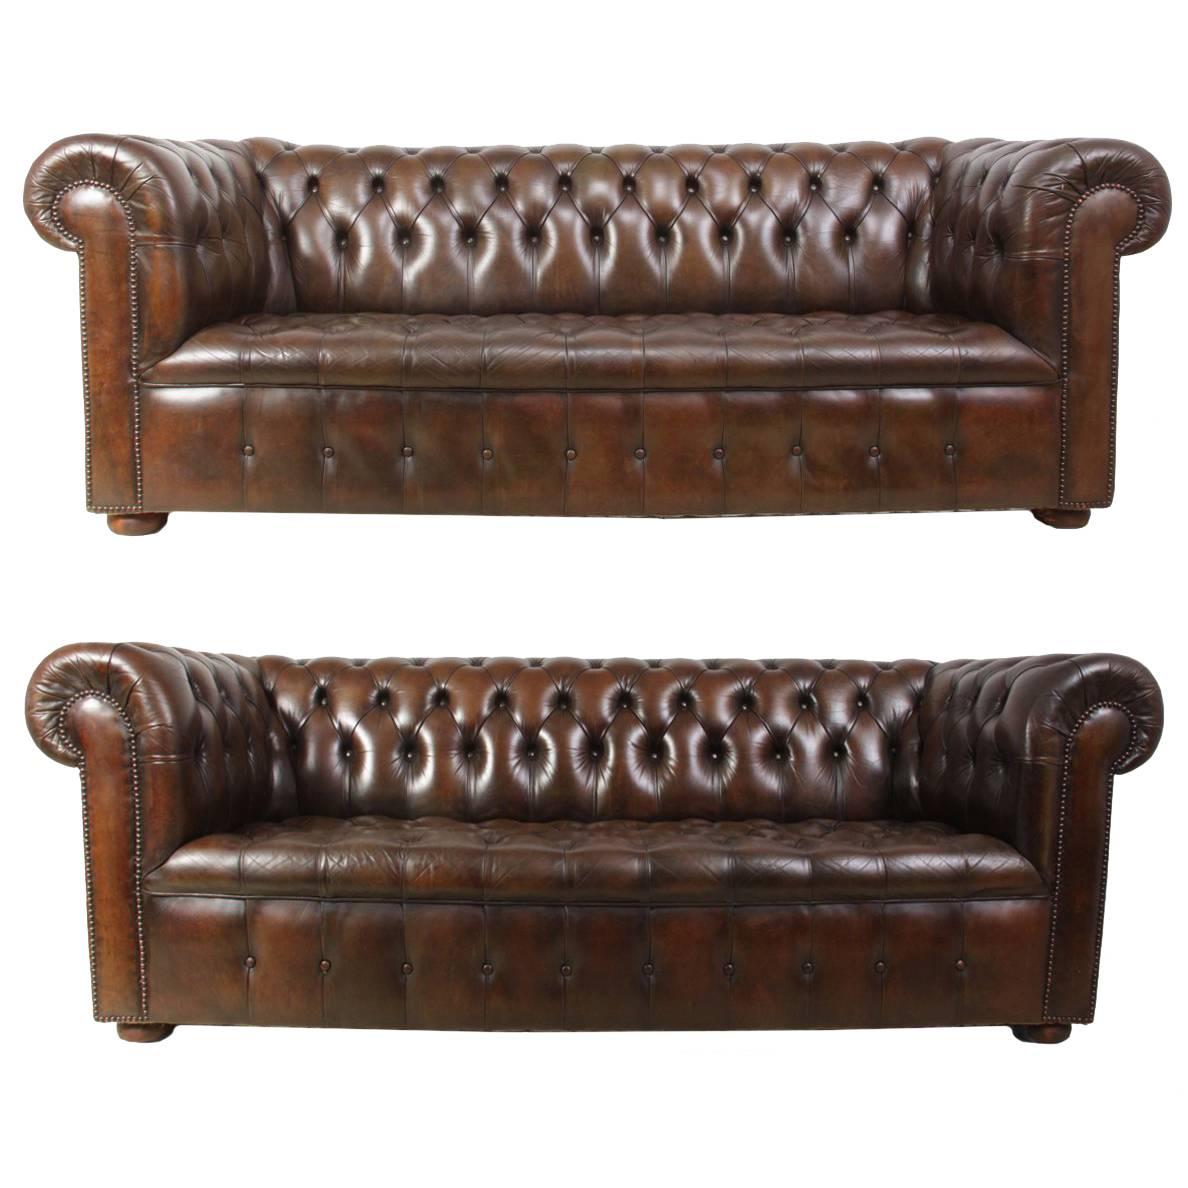 Pair of Vintage Brown Leather Chesterfields